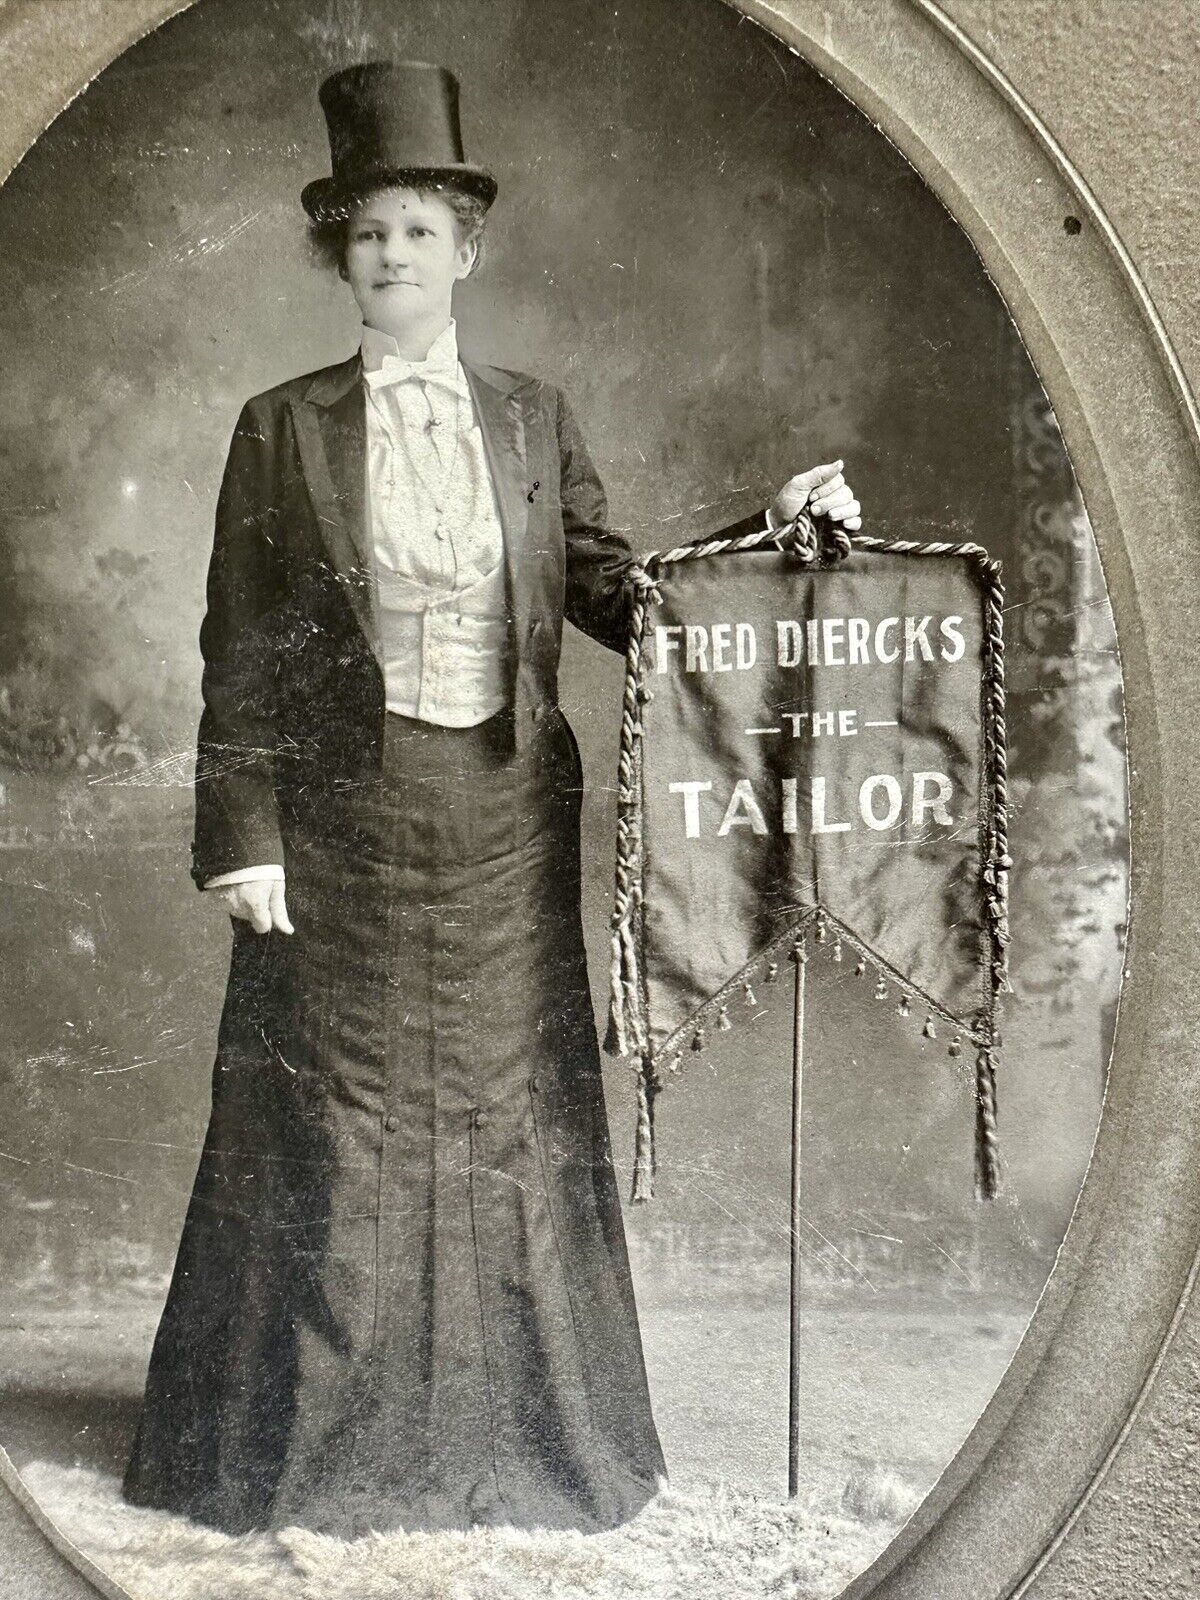 RARE LARGE PHOTO BANNER LADY HOLDING TAILOR ADVERTISING SIGN TEXAS PHOTOGRAPHER